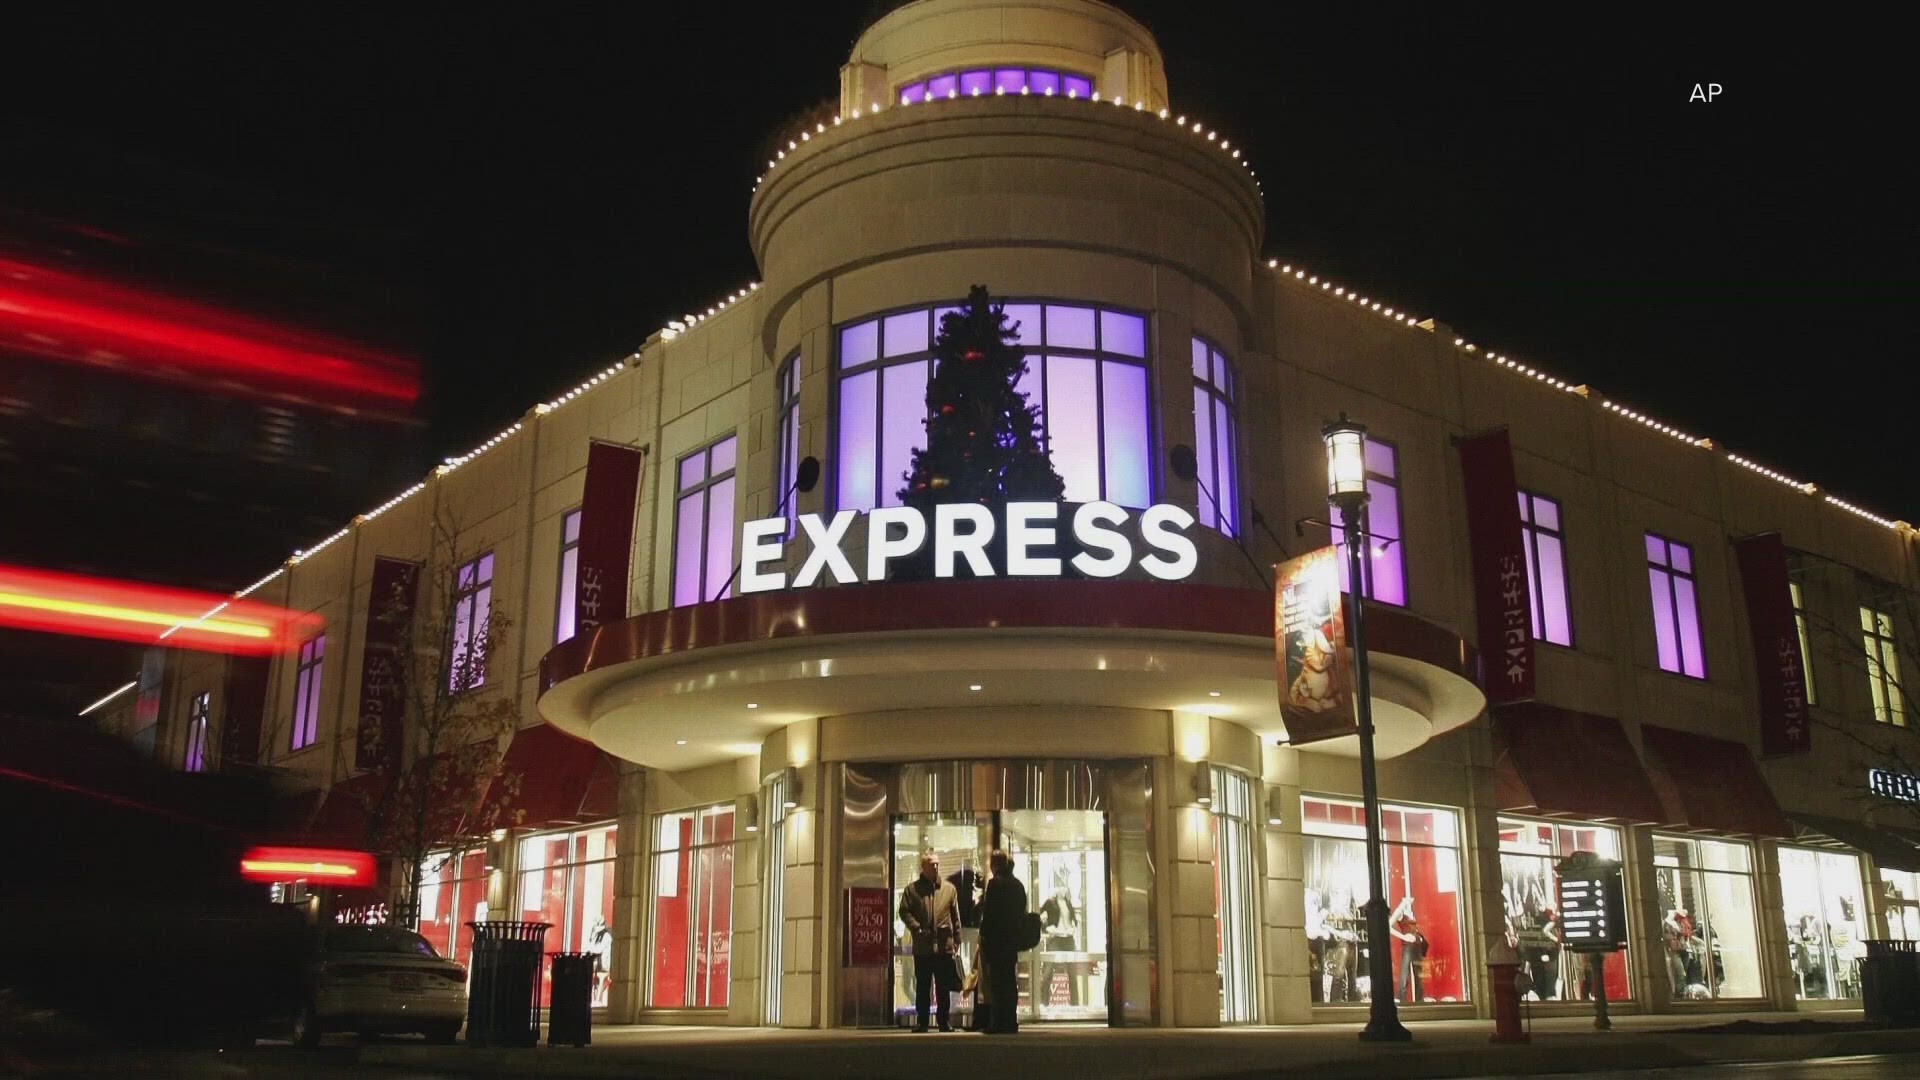 Express plans to close 95 of its stores as the company is seeking Chapter 11 bankruptcy protection. It also intends to close all UpWest stores.